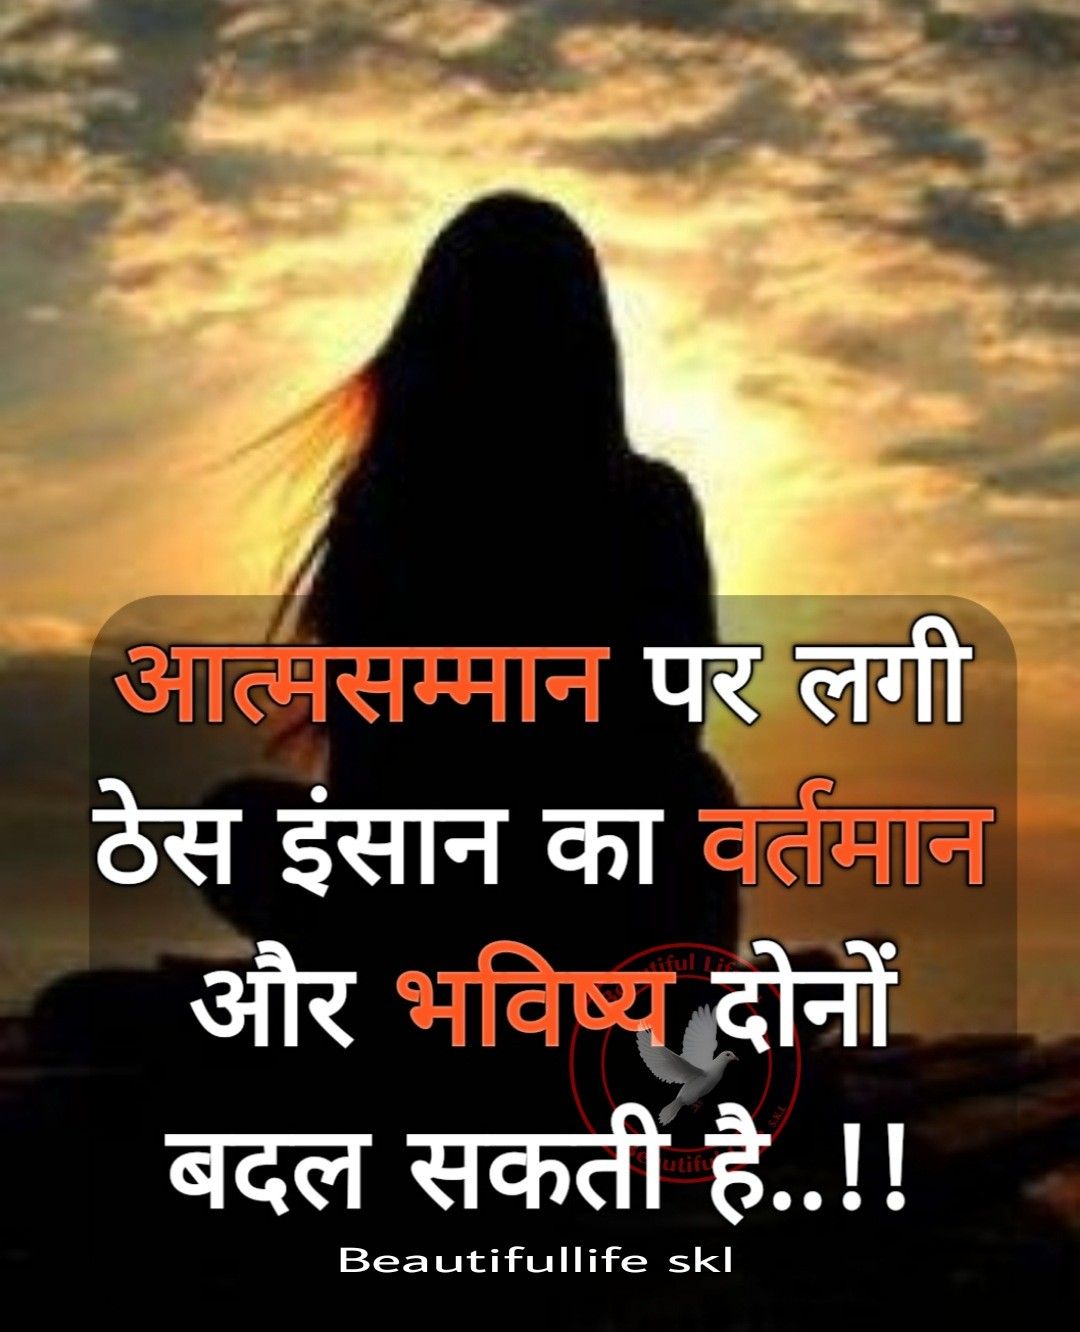 Self respect shayari 2 line - from Self Respect Quotes in Hindi